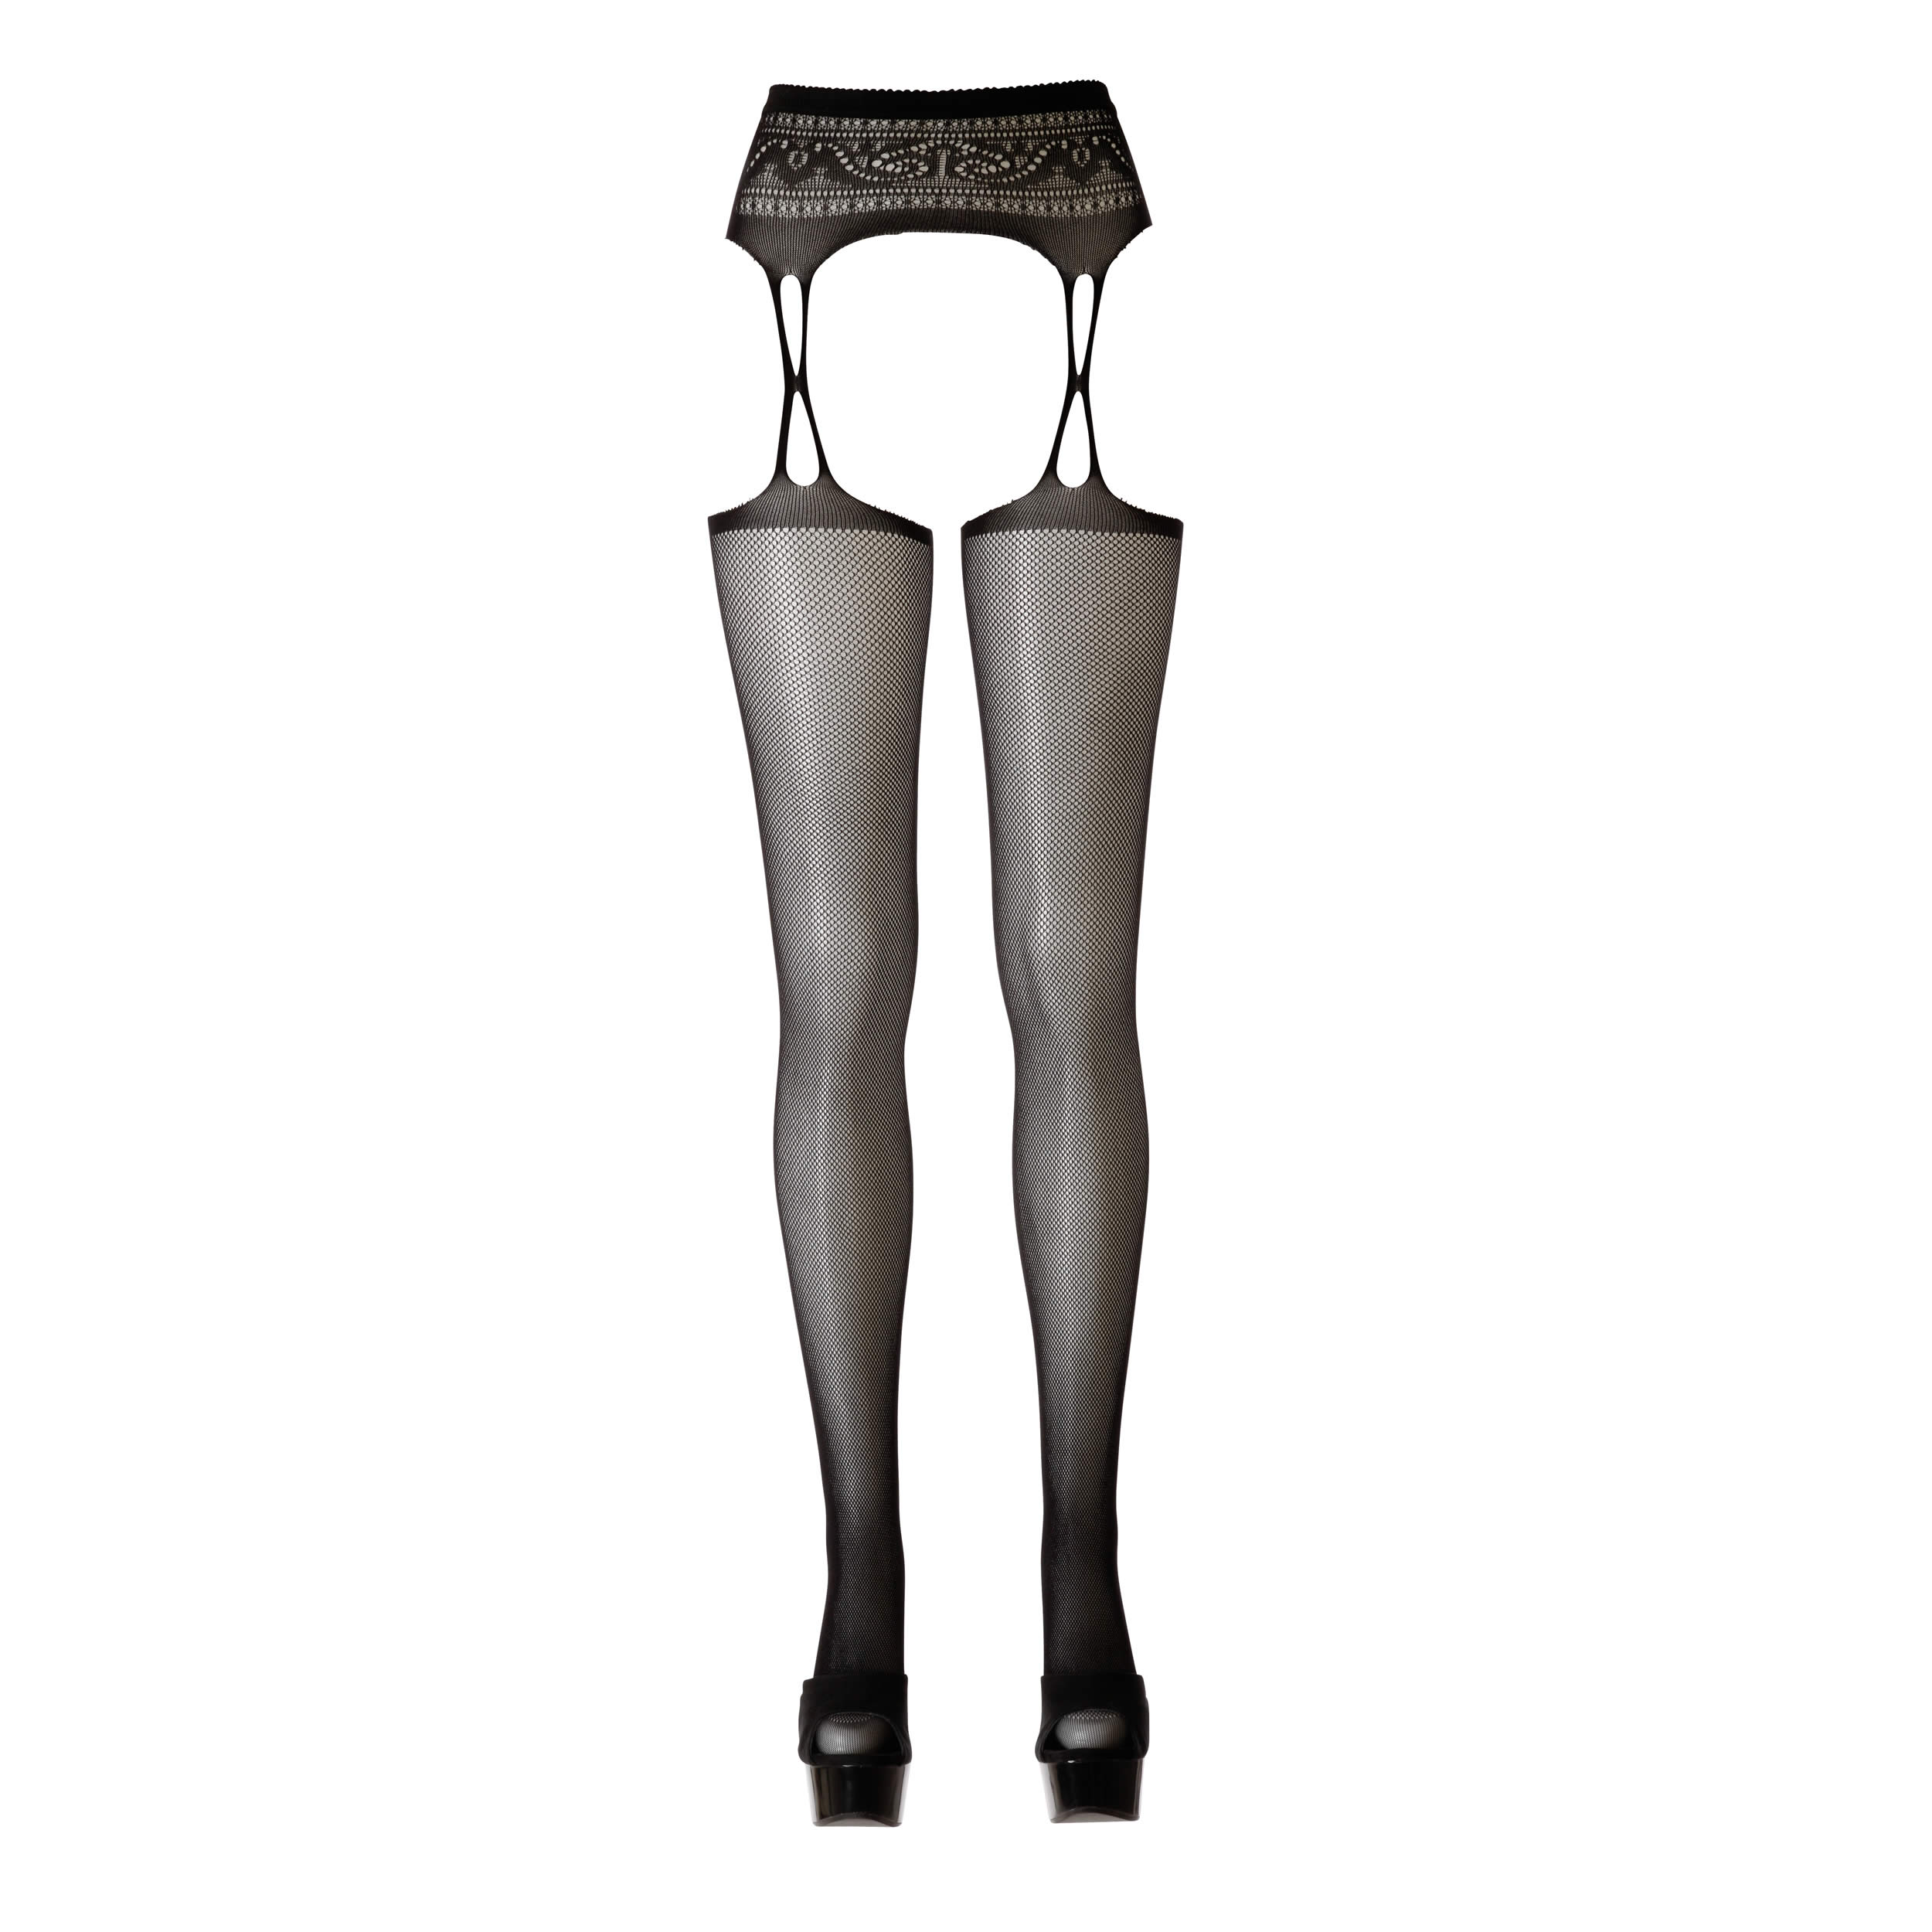 Suspender Belt and Net Stockings with Lace and Seam